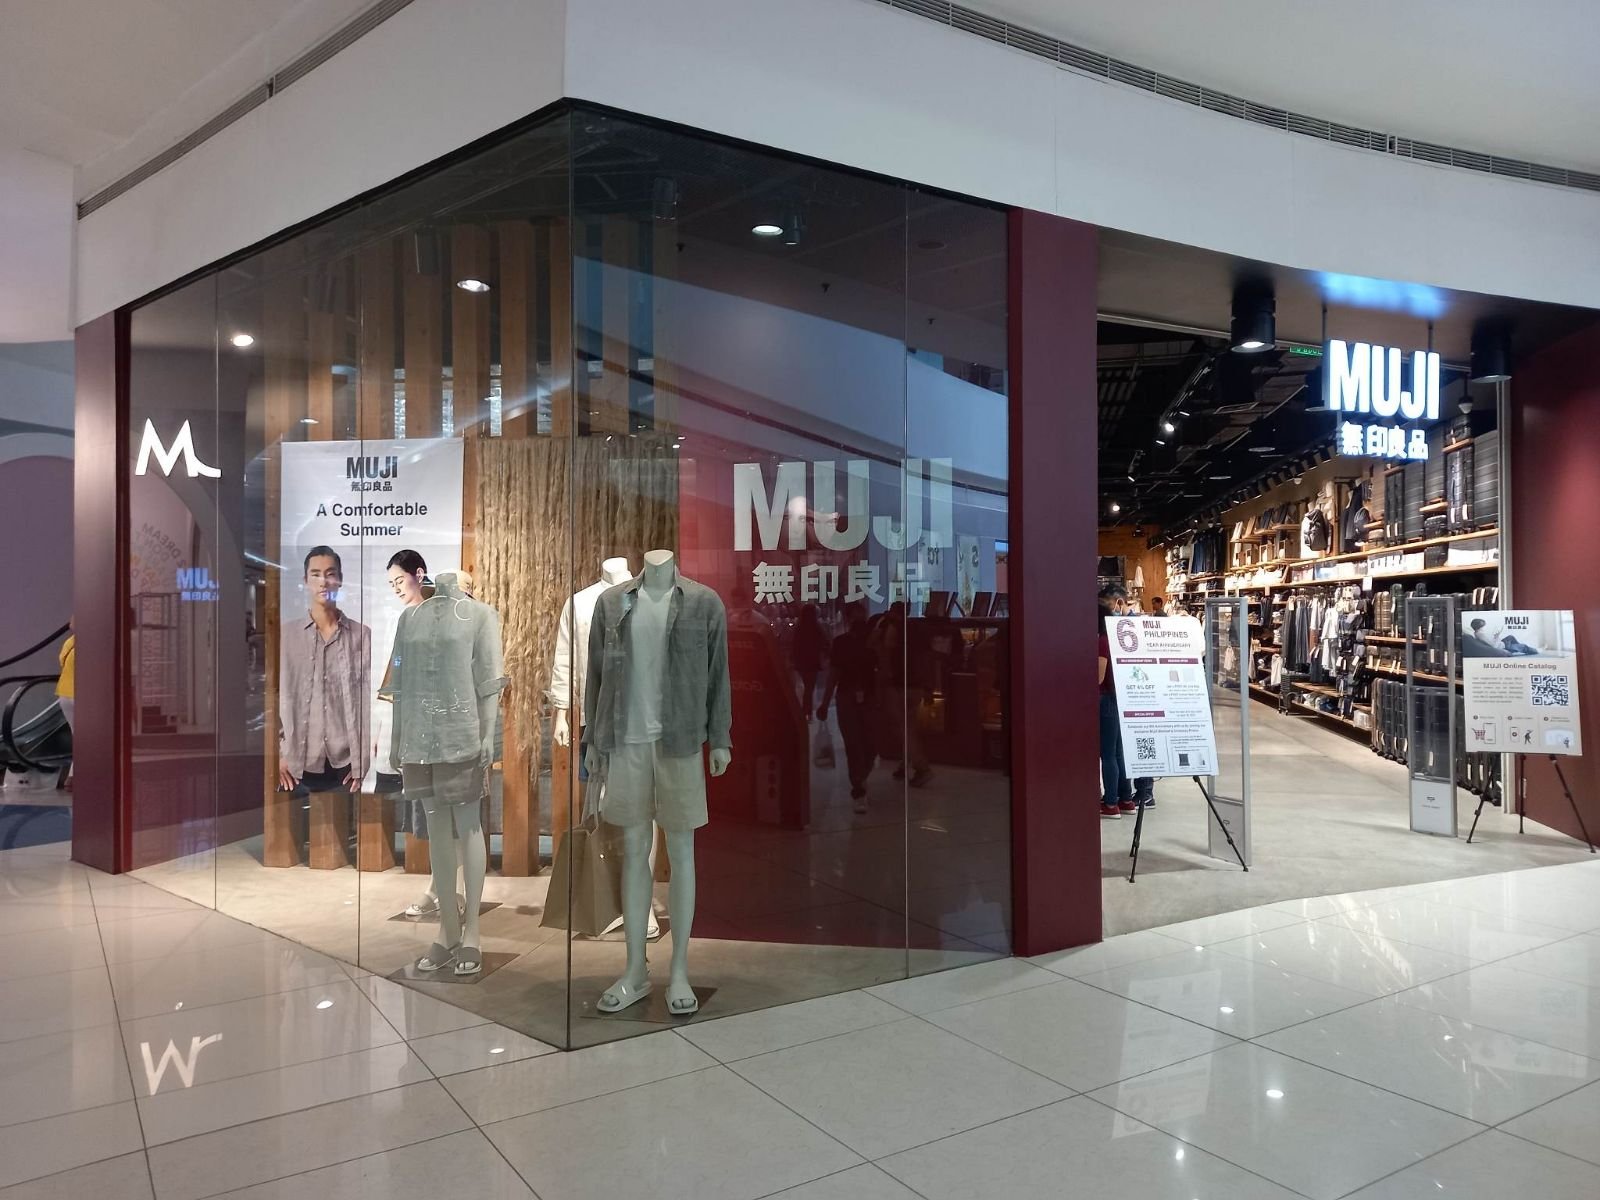 Shop From Muji Japan and Ship to Philippines